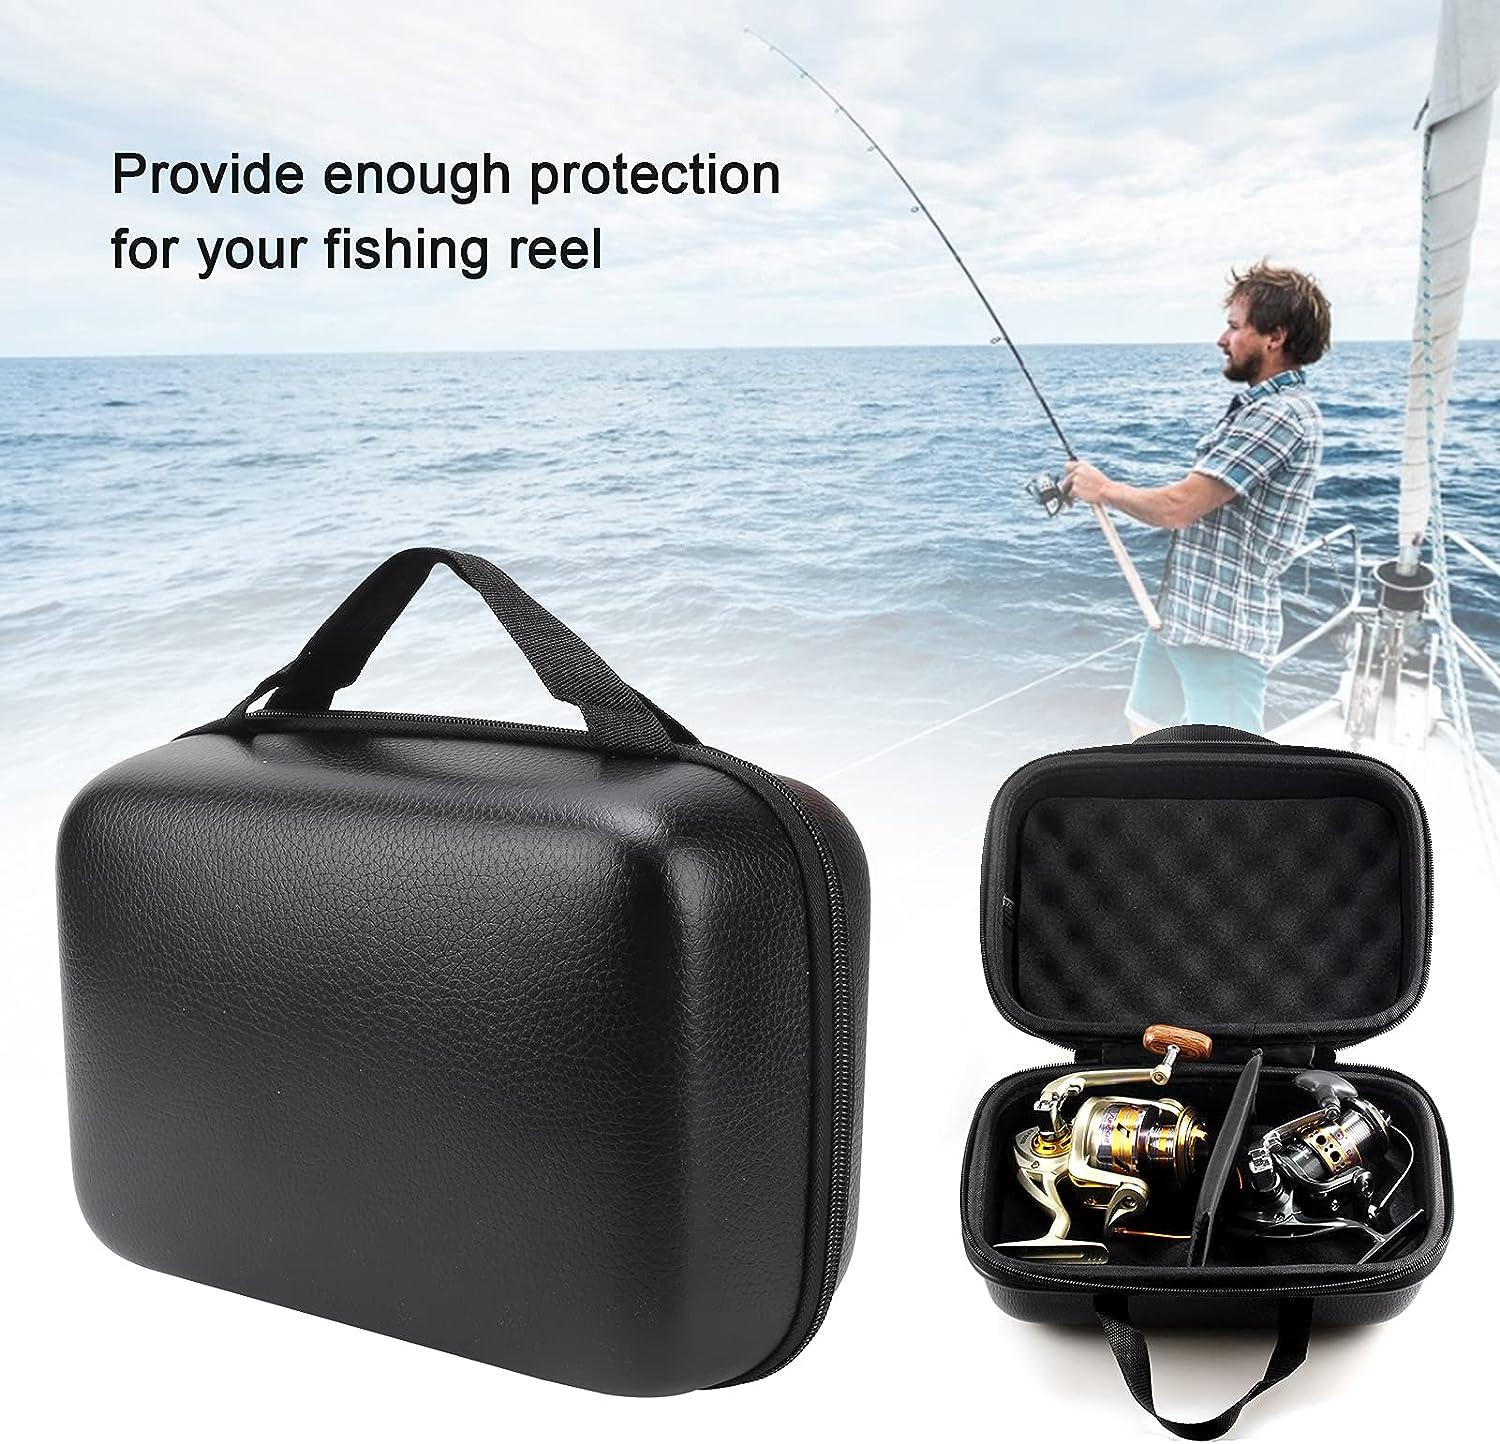 Xirfuni Fishing Reel Protective Case Pouch, Fishing Reel Hard Case Storage  Box for Fishing Reels for Fishing Reel Gear Storage Bag large